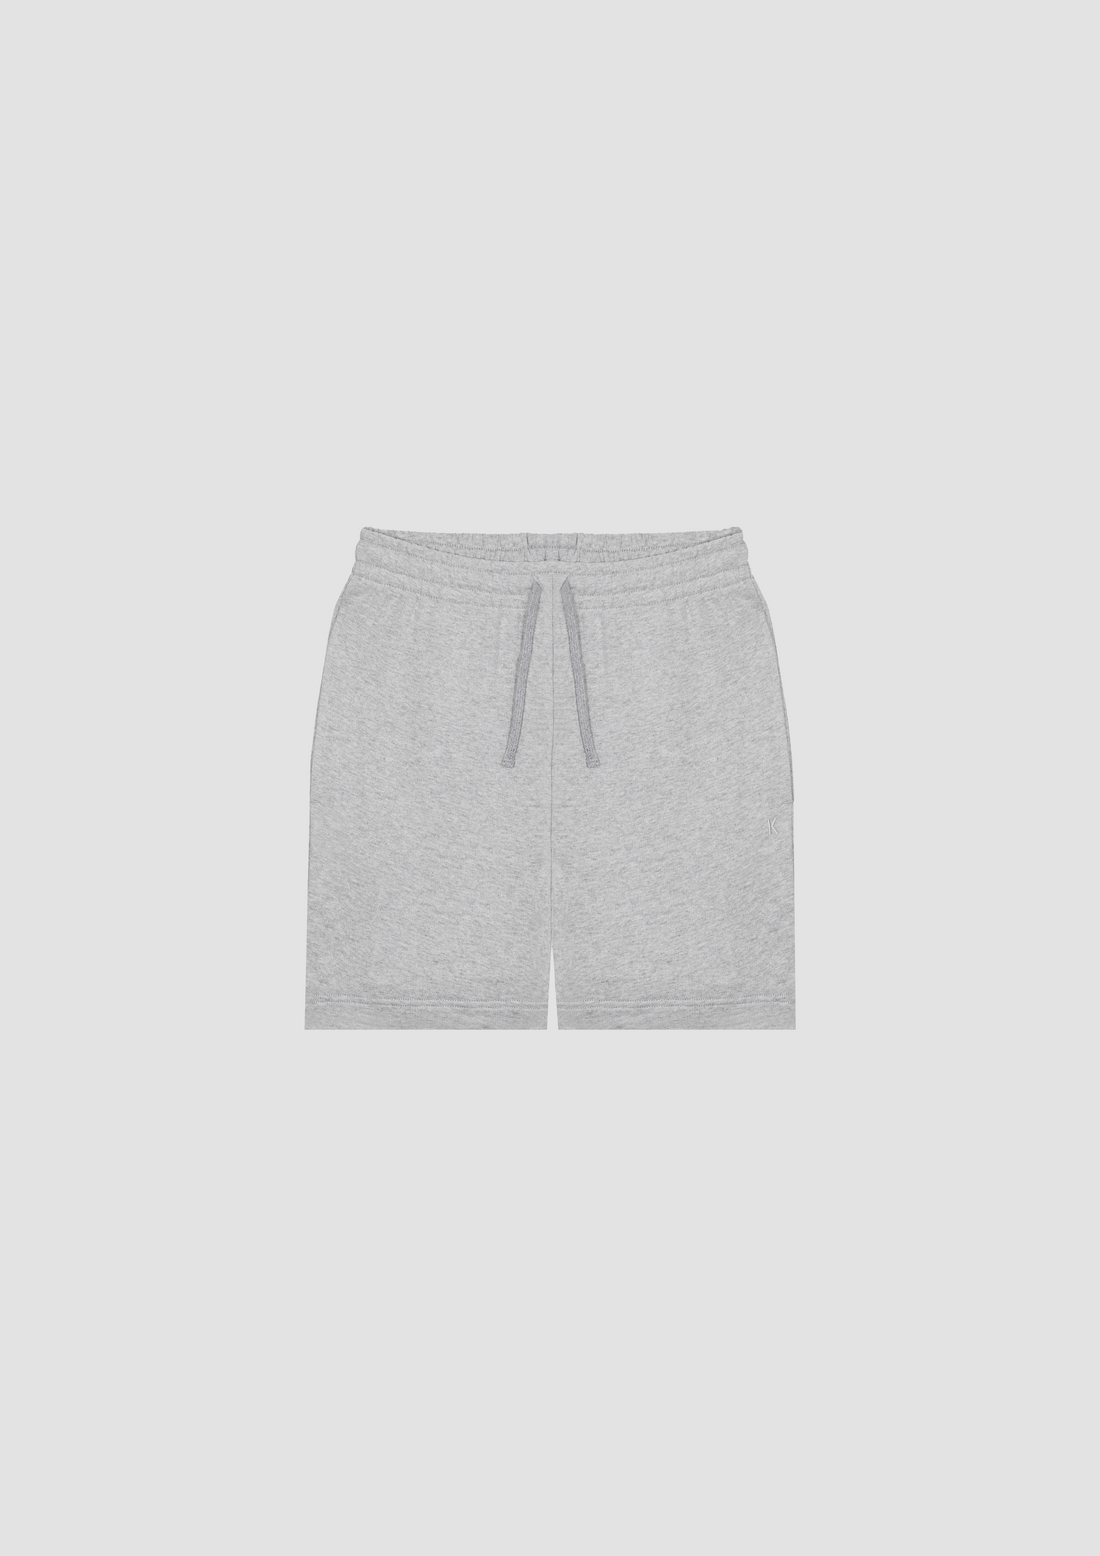 Lennox Shorts in Recycled Cotton, TENCEL™ Lyocell, TENCEL™ Recycled Lyocell and Recycled Linen in Melange